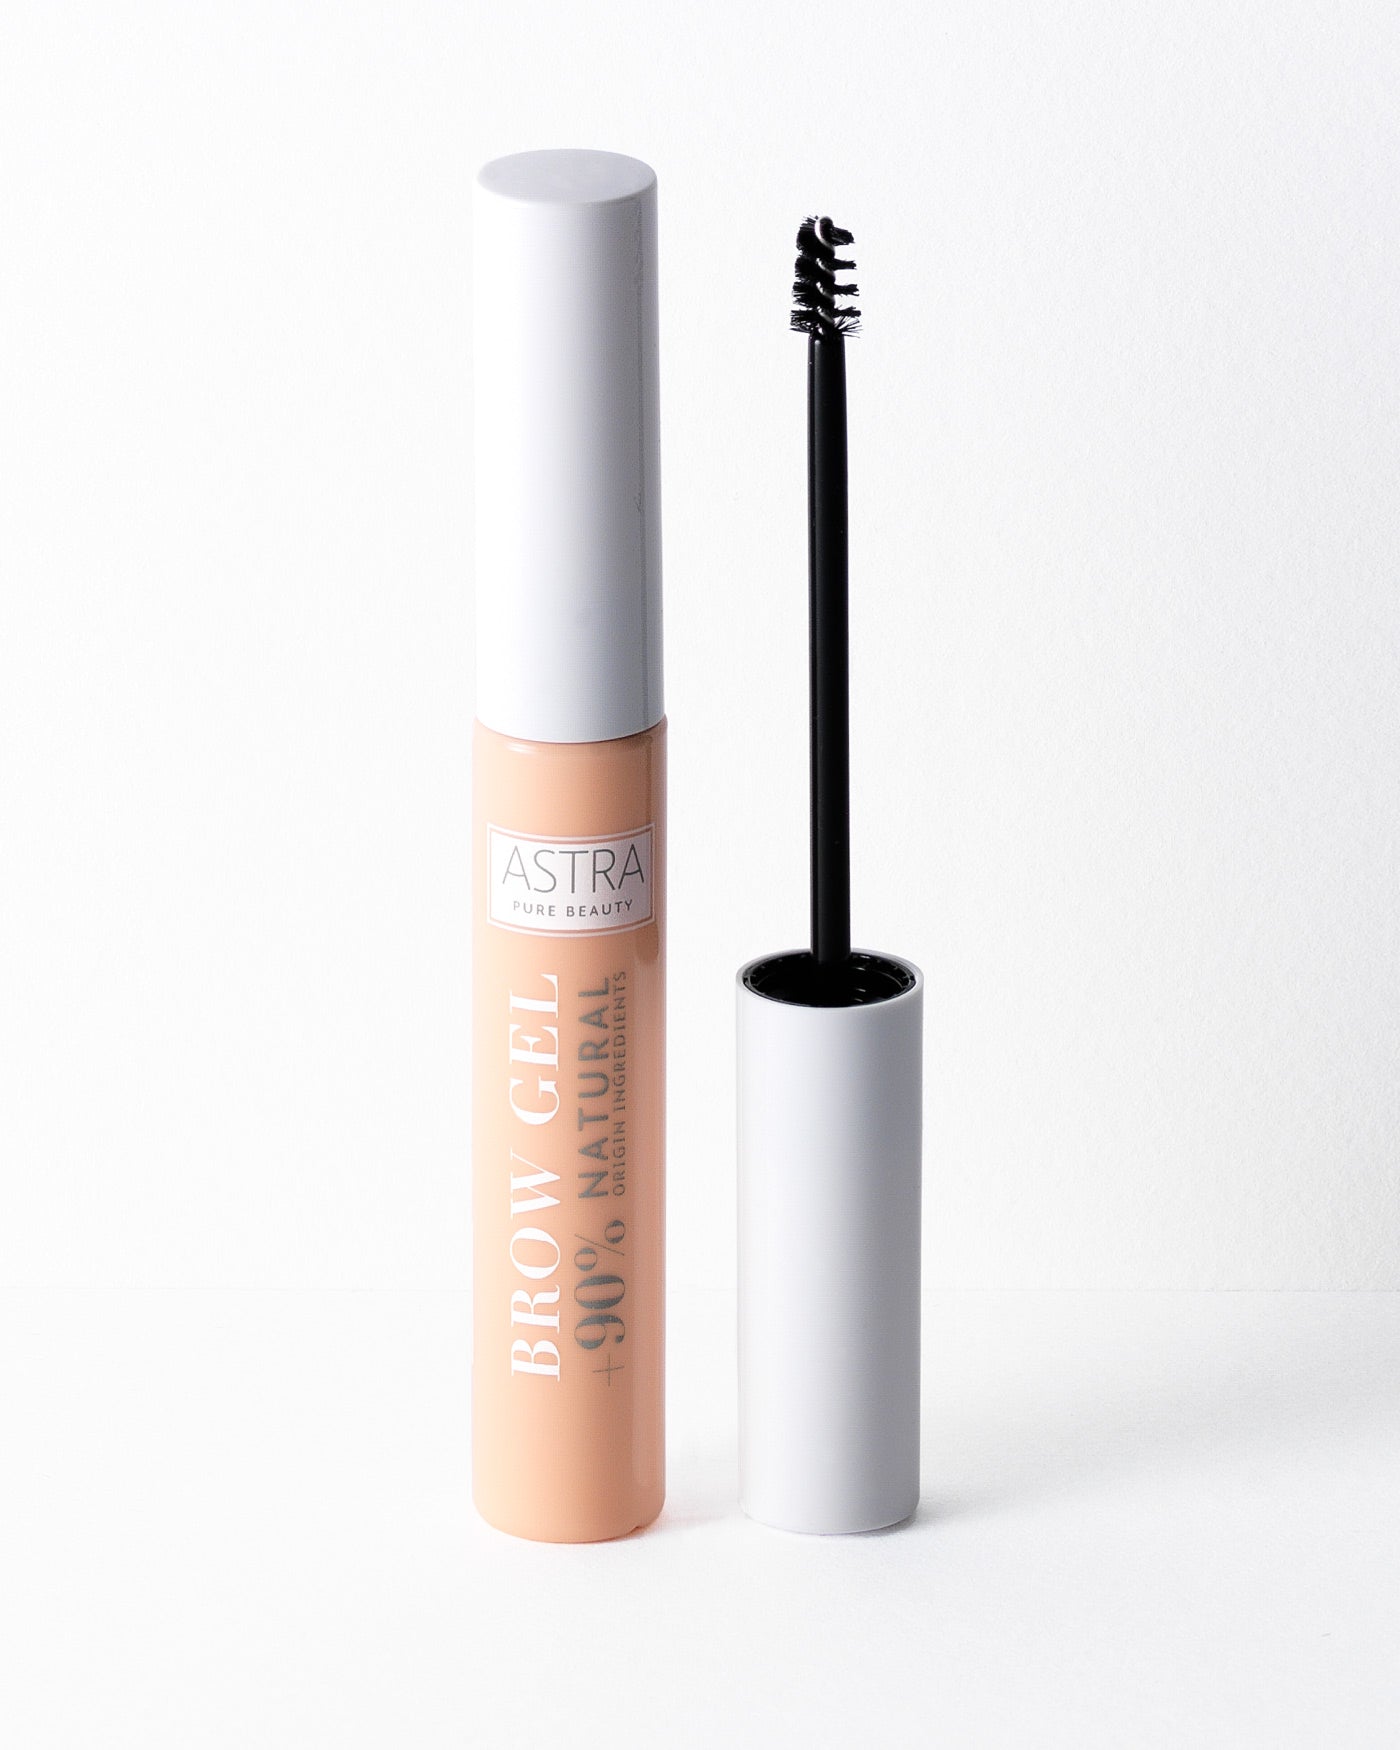 PURE BEAUTY BROW GEL - Clear - Astra Make-Up